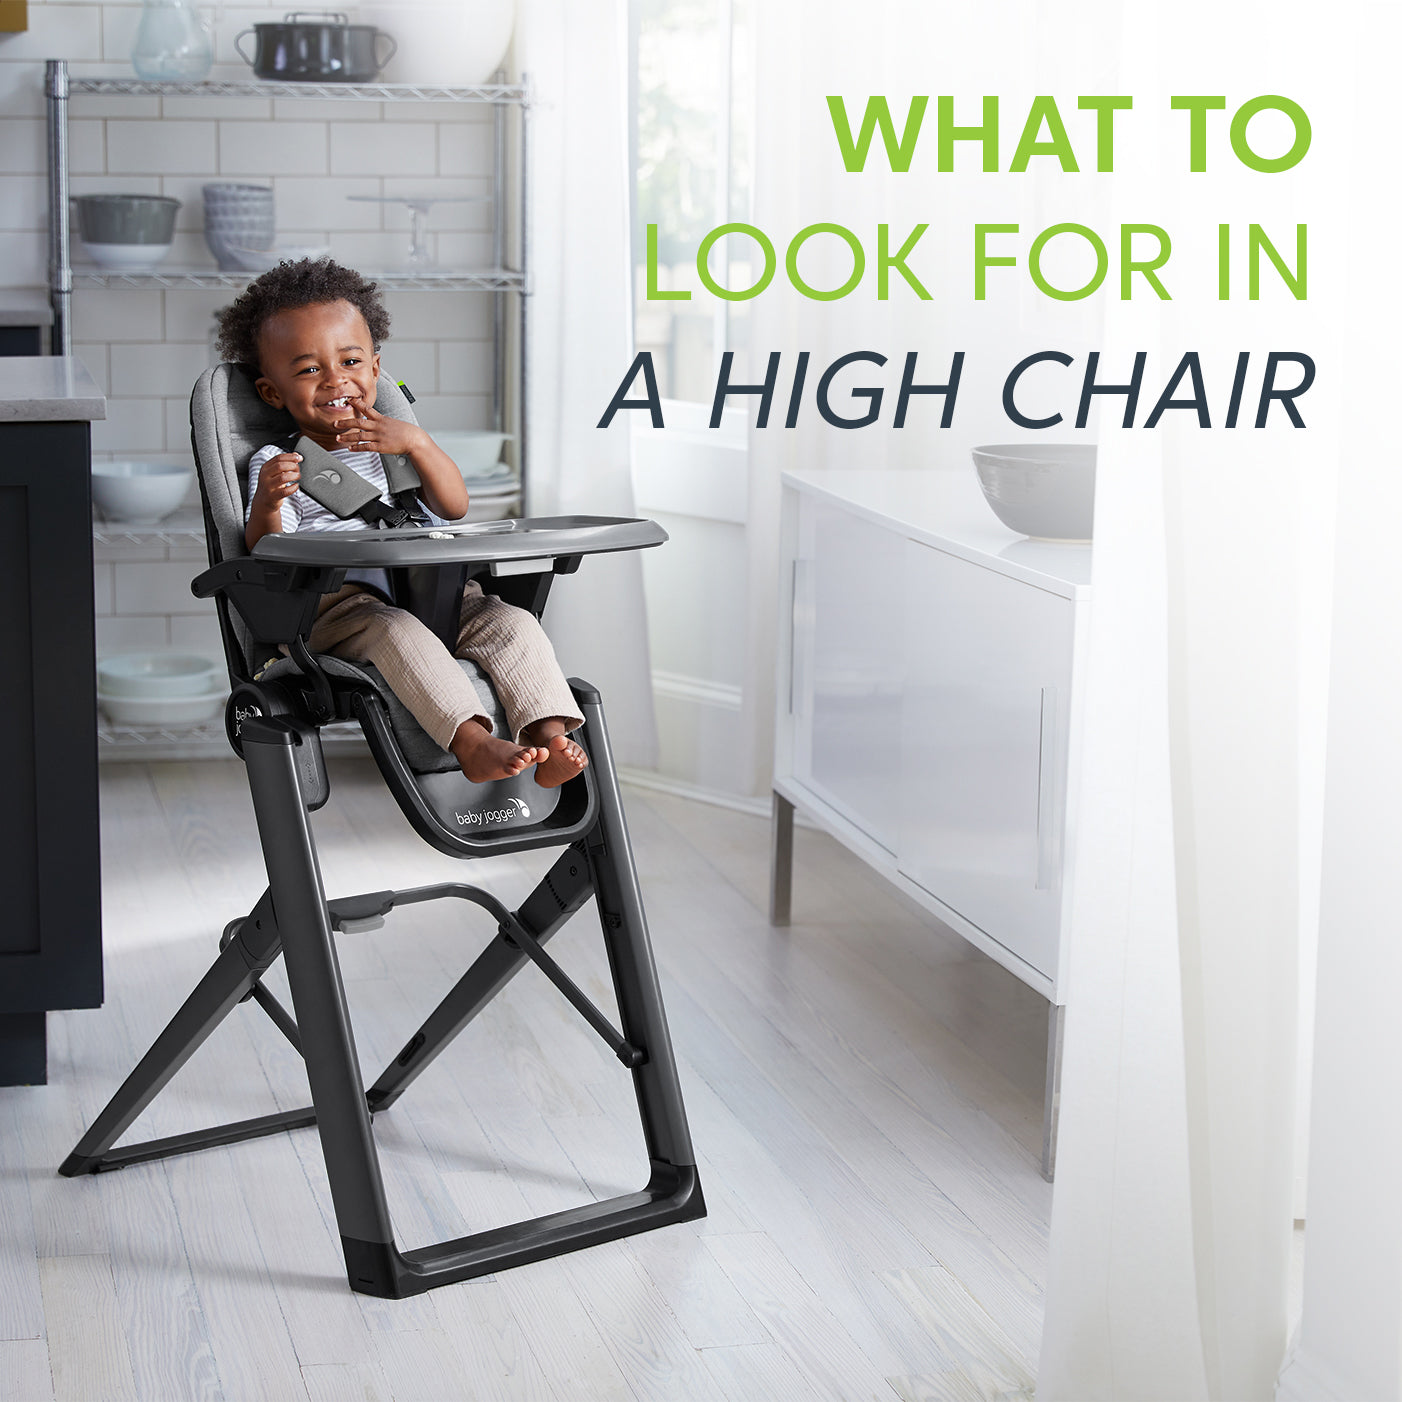 What to look for in a high chair?